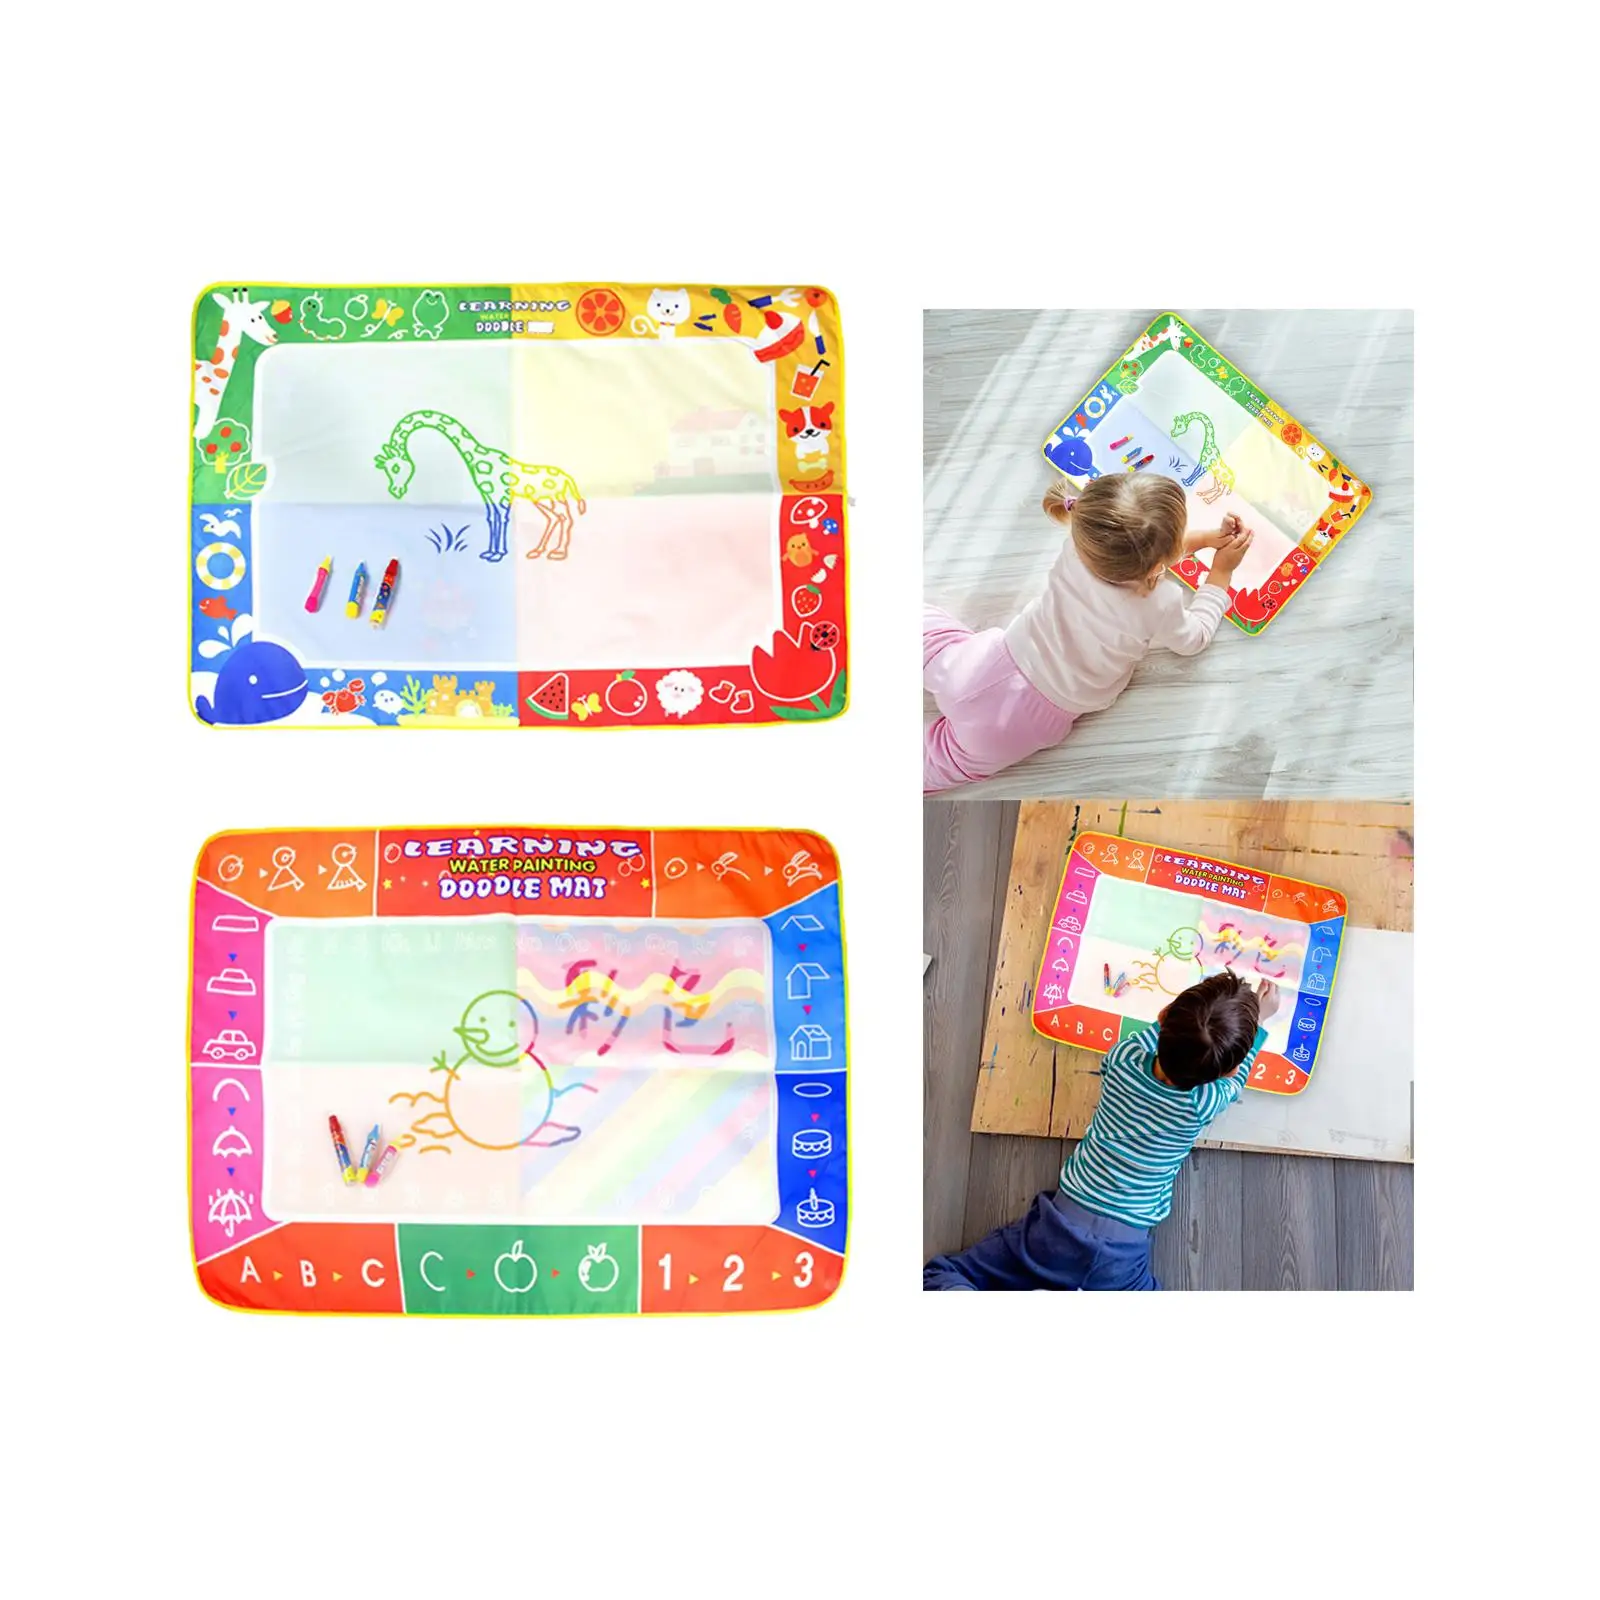 Doodle Mat Learning Toy Reusable No Mess 40x28 inch Water Drawing Mat Coloring Pad for Educational Toy Travel Chriatmas Present